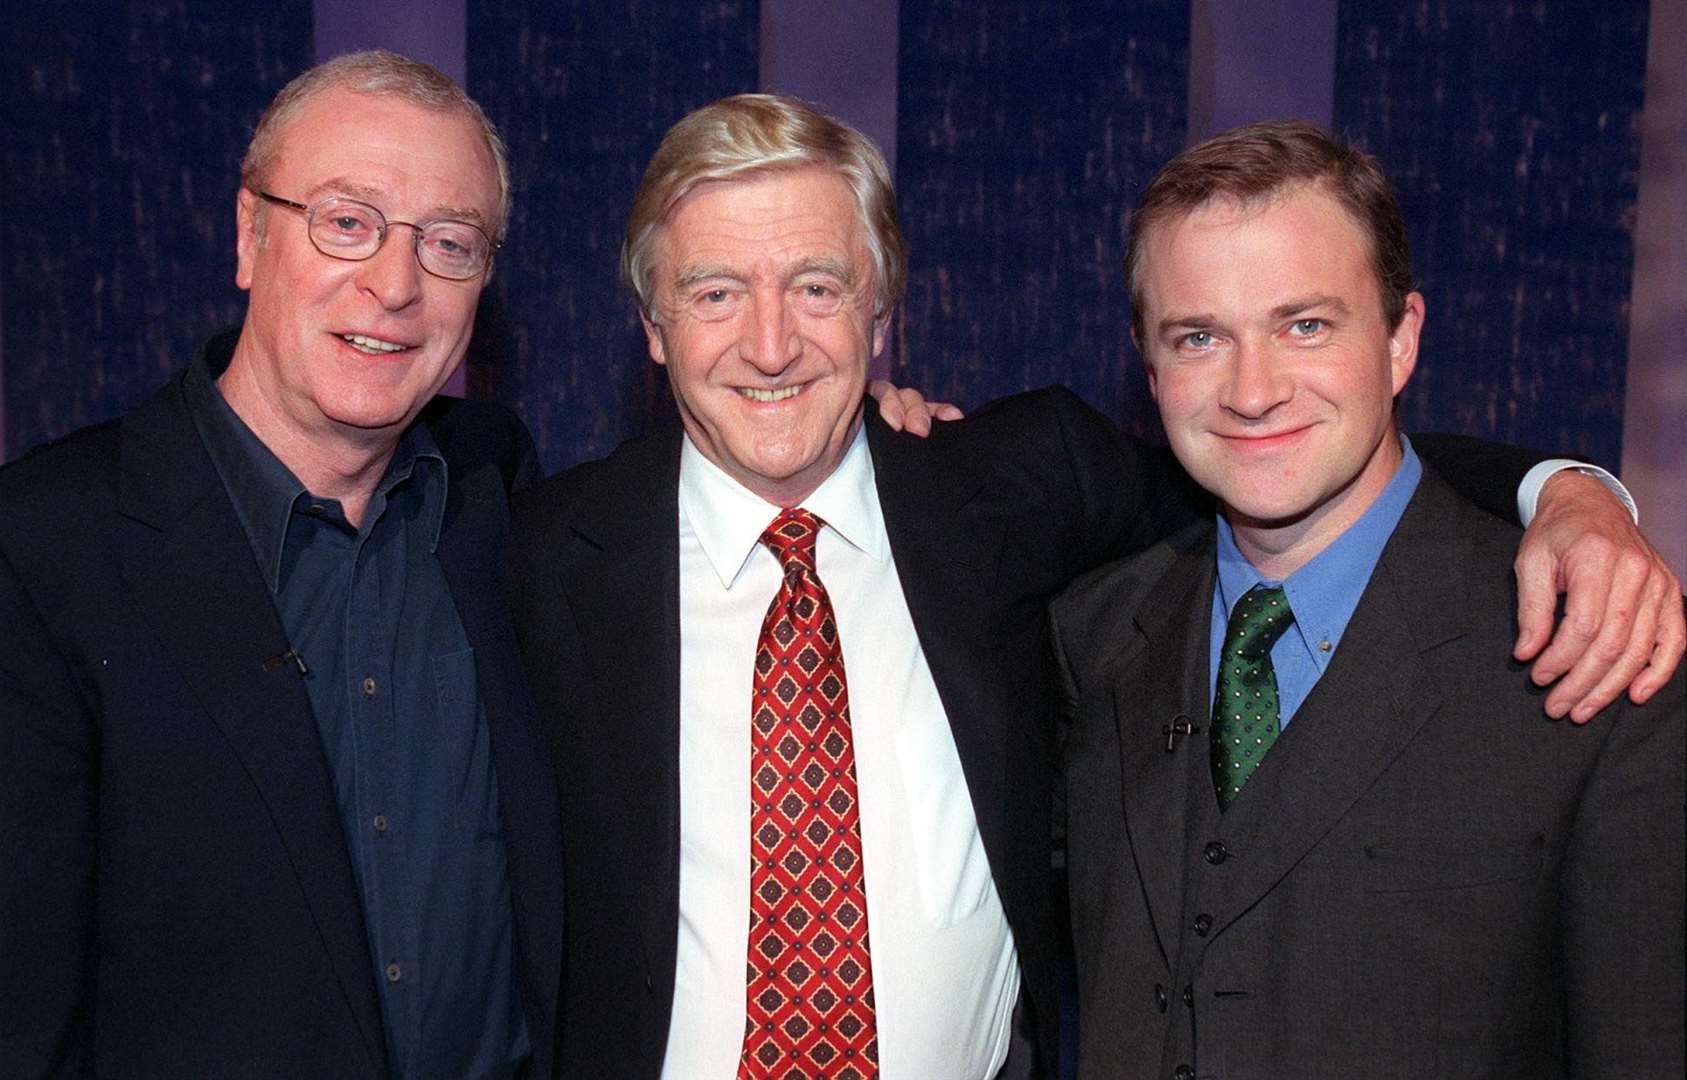 Sir Michael with Sir Michael Caine and Harry Enfield (BBC/PA)